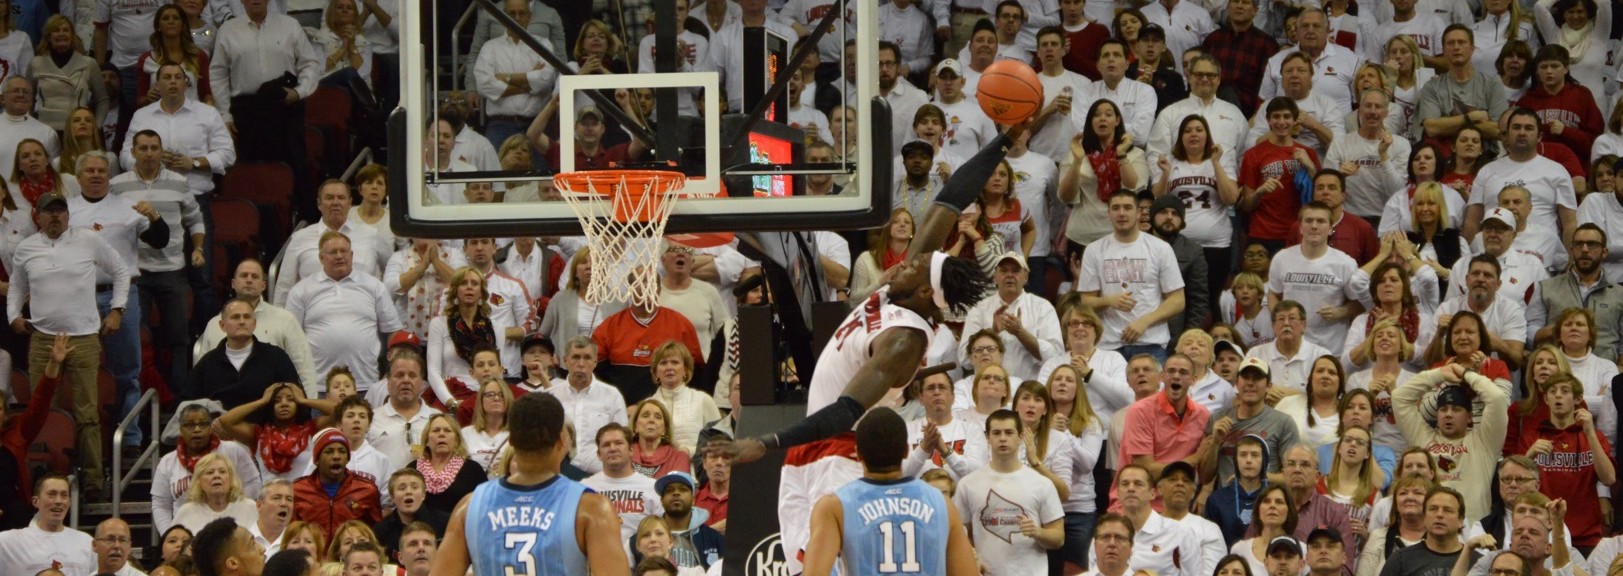 Montrezl Harrell Alley Oop Louisville vs. North Carolina 1-31-2015 Photo by Seth Bloom Fitted